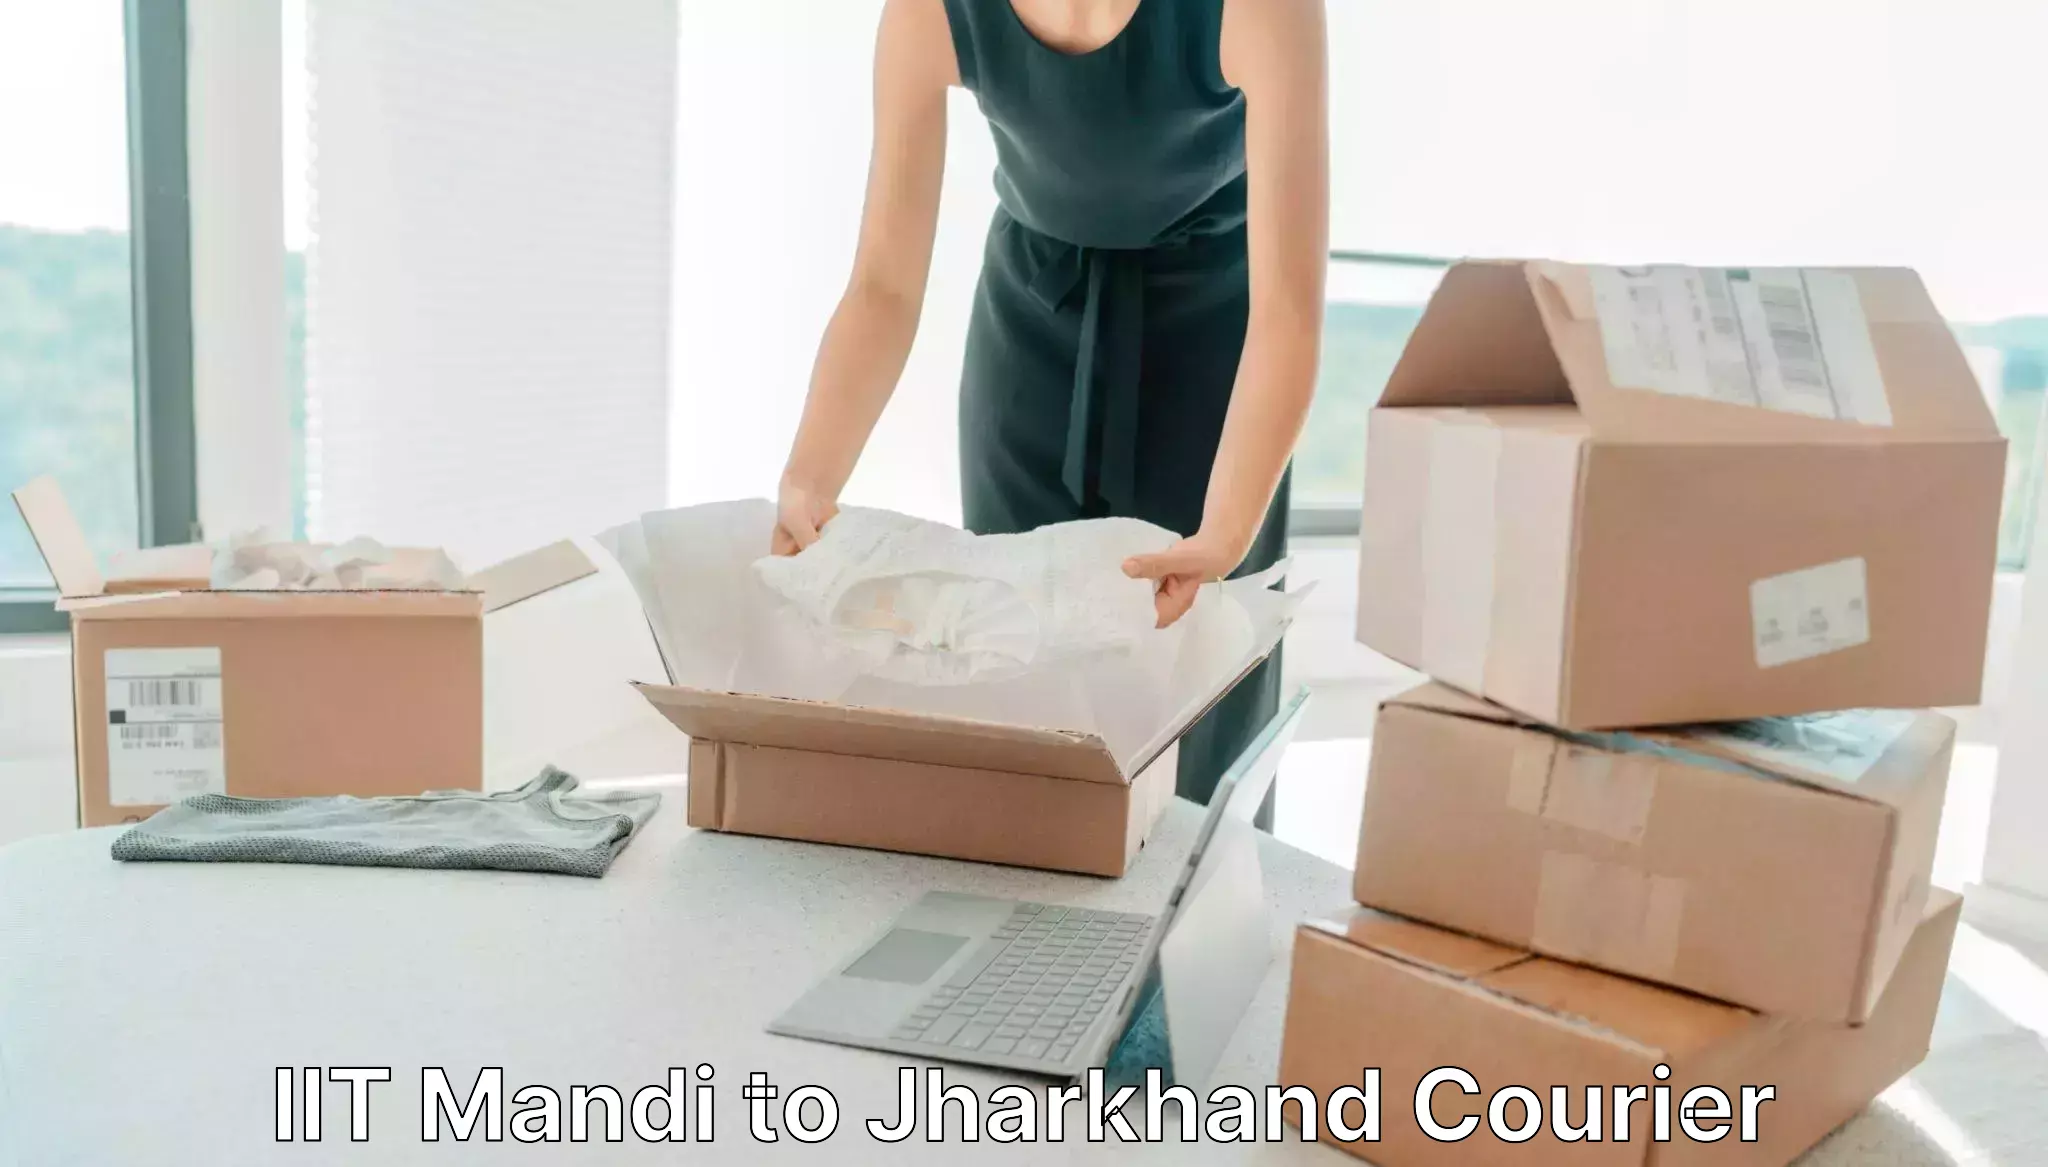 End-to-end delivery IIT Mandi to Adityapur